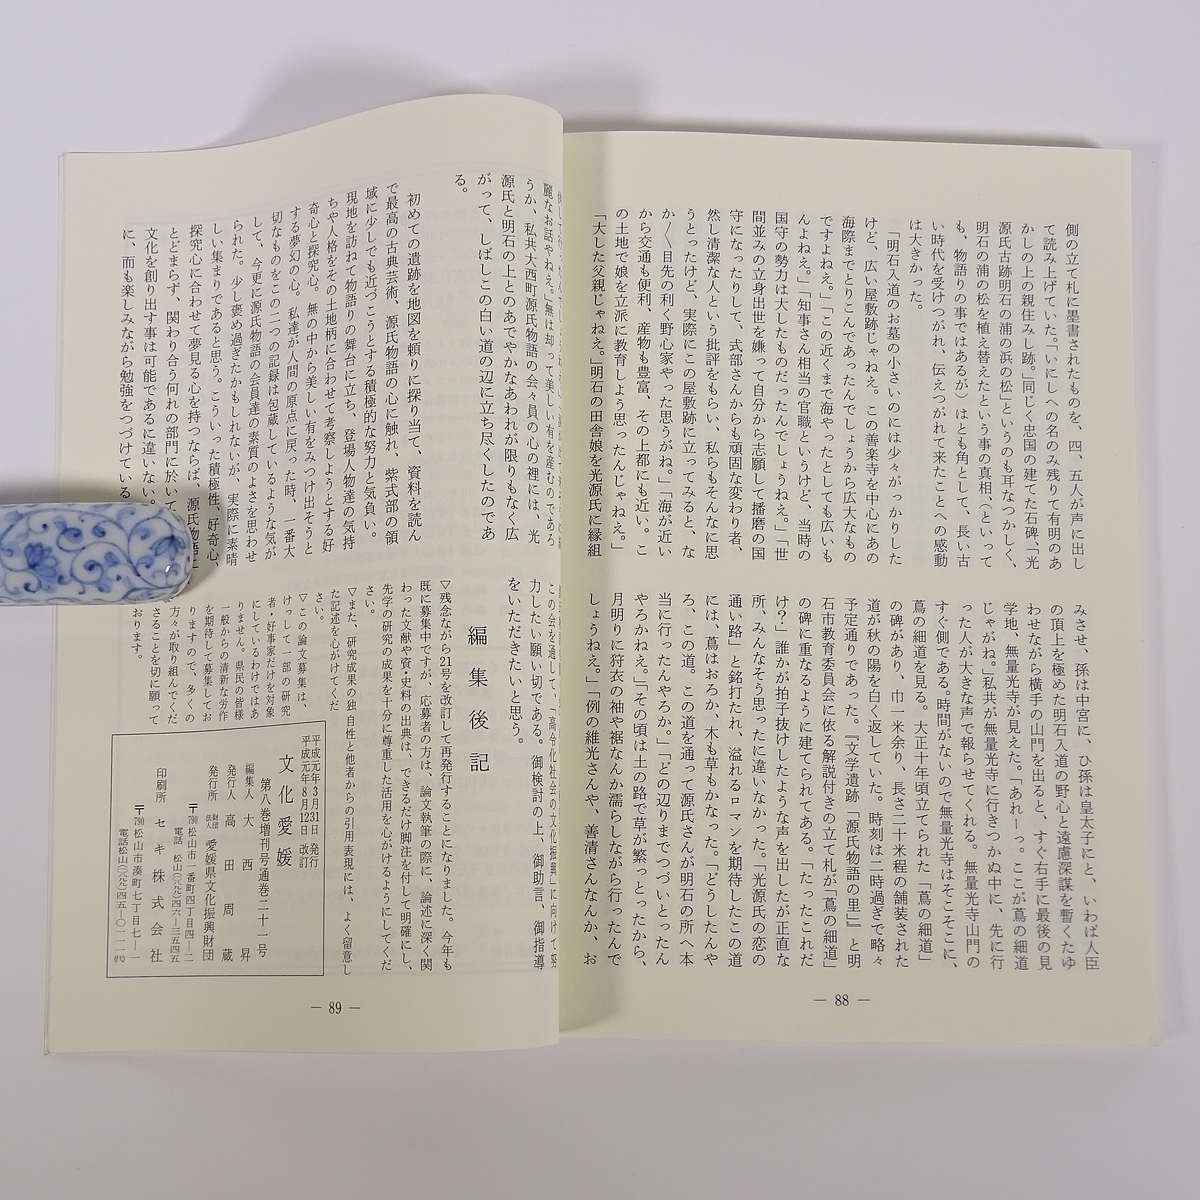  culture Ehime no. 21 number ( modified . version ) Ehime prefecture culture .. foundation 1989 small booklet . earth book@ special collection * prize theory writing go in . work ..... thing close . the first period . peace sea regarding fishes other 